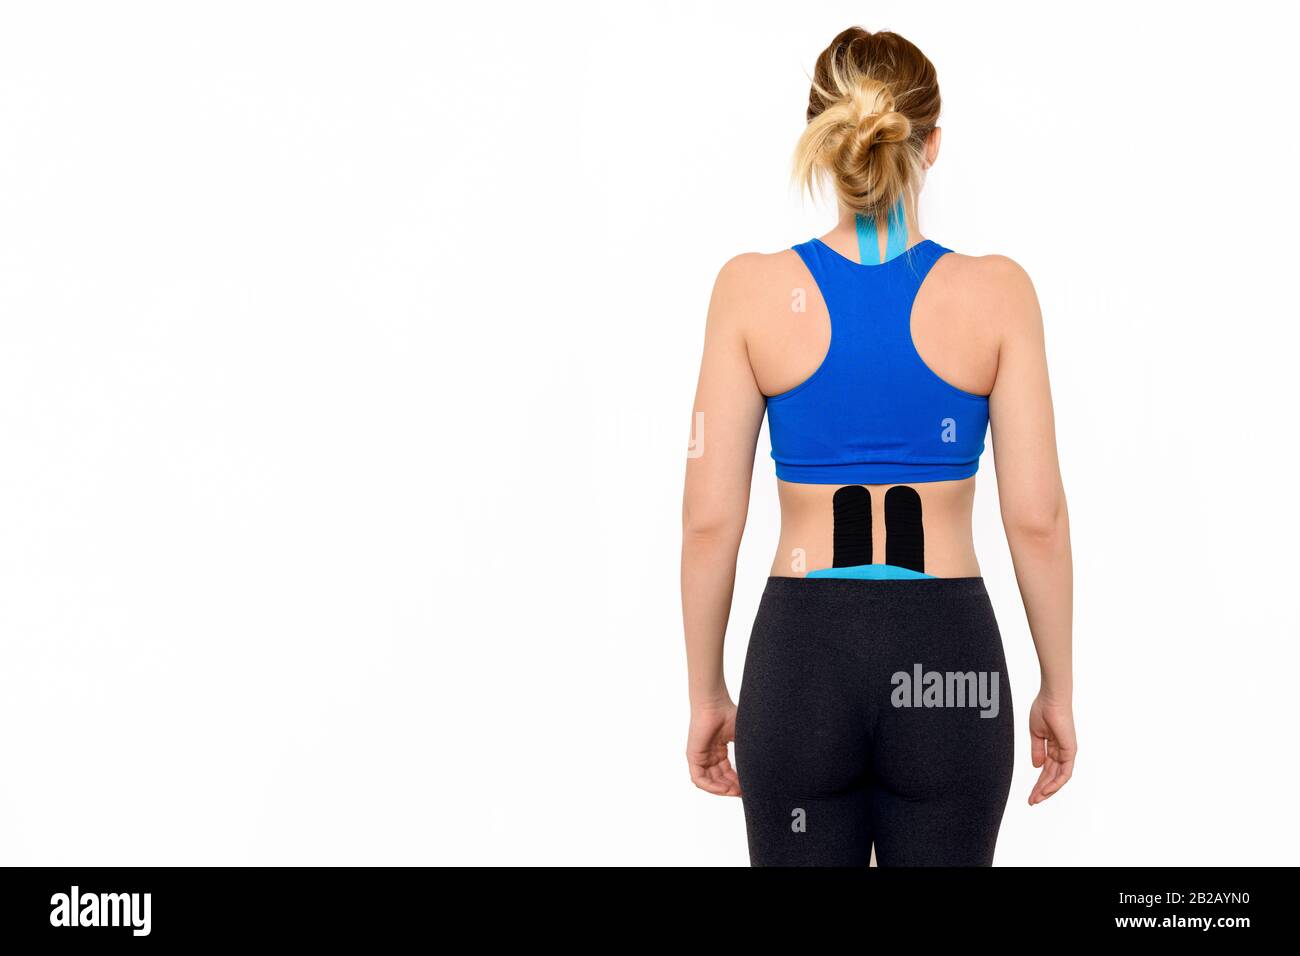 Rear view three quarter length studio shot of a female patient with kinesio tape on her neck and lower back, isolated over white background. Stock Photo